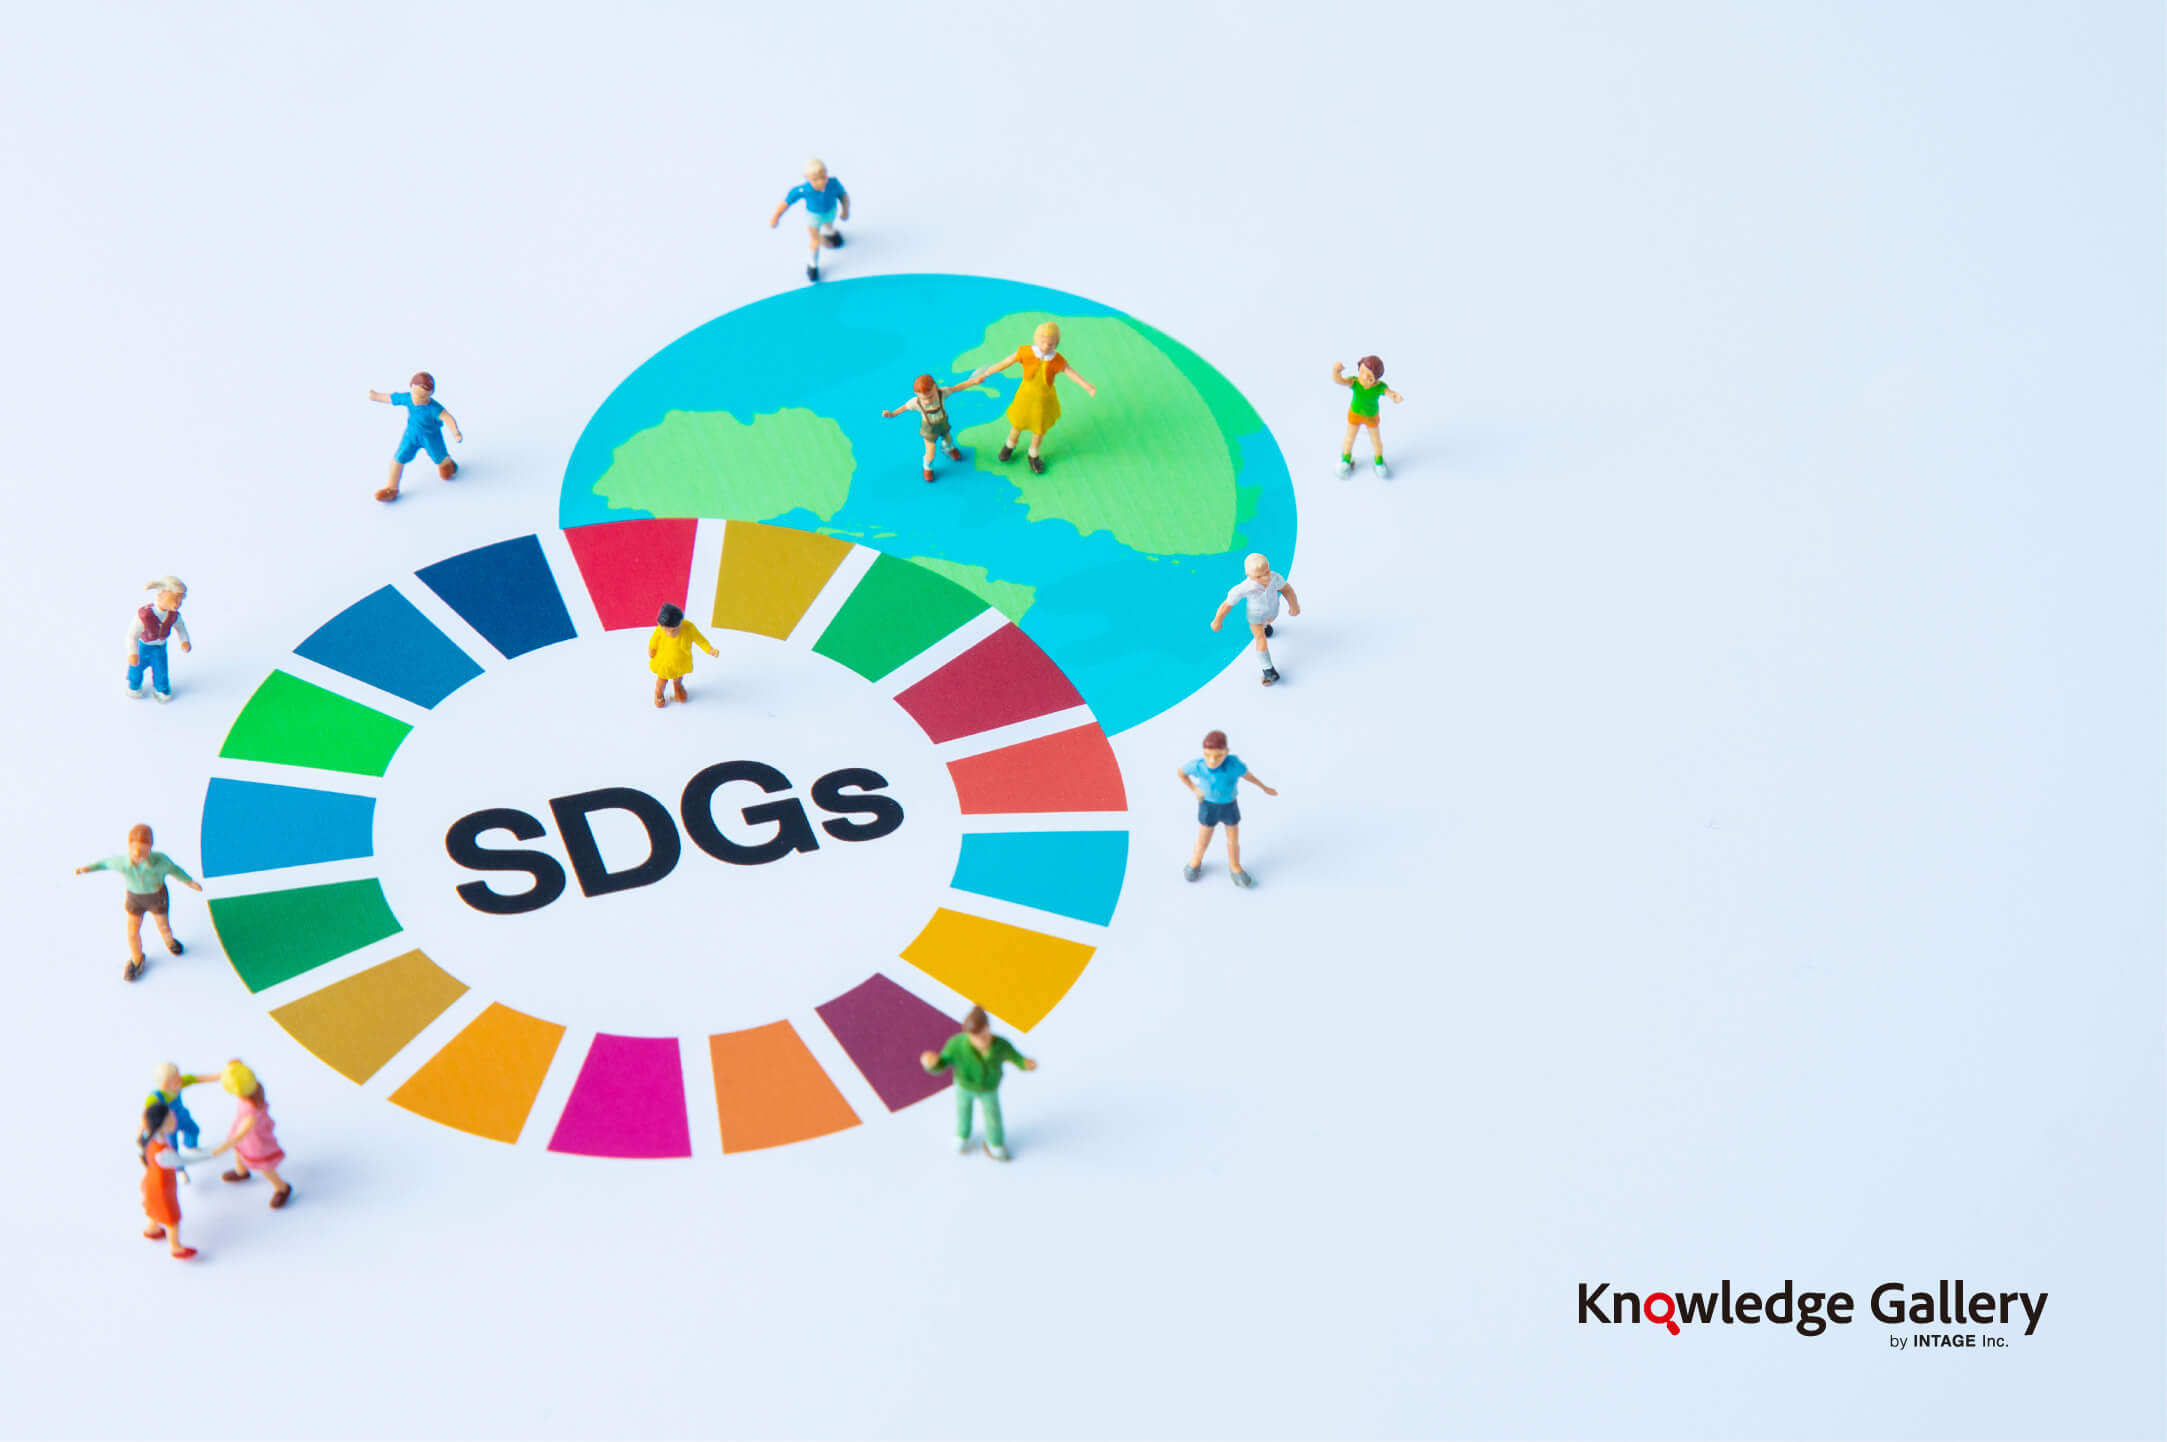 What New Trends Can Be Seen in Japanese People’s “Prioritization” of SDGs in 2023?